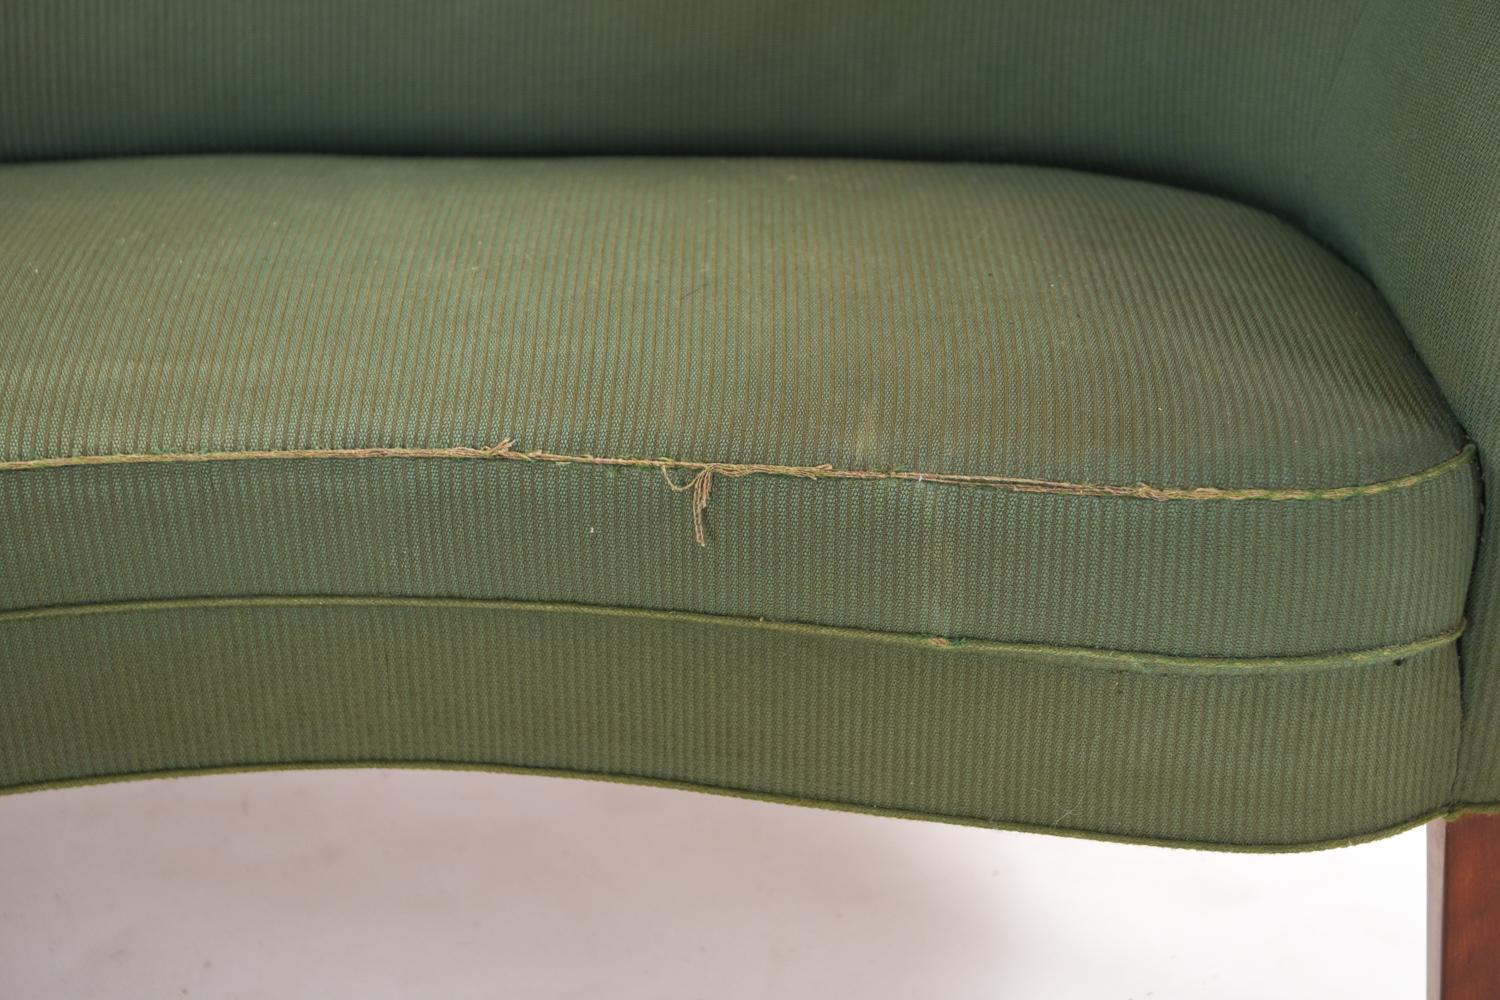 An unusual model 185 Danish midcentury sofa by Slagelse Mobelvaerk. This modern sofa features a design composed of curved lines and a tufted back. In original green upholstery, a blank slate which could be updated to suit one's personal style.